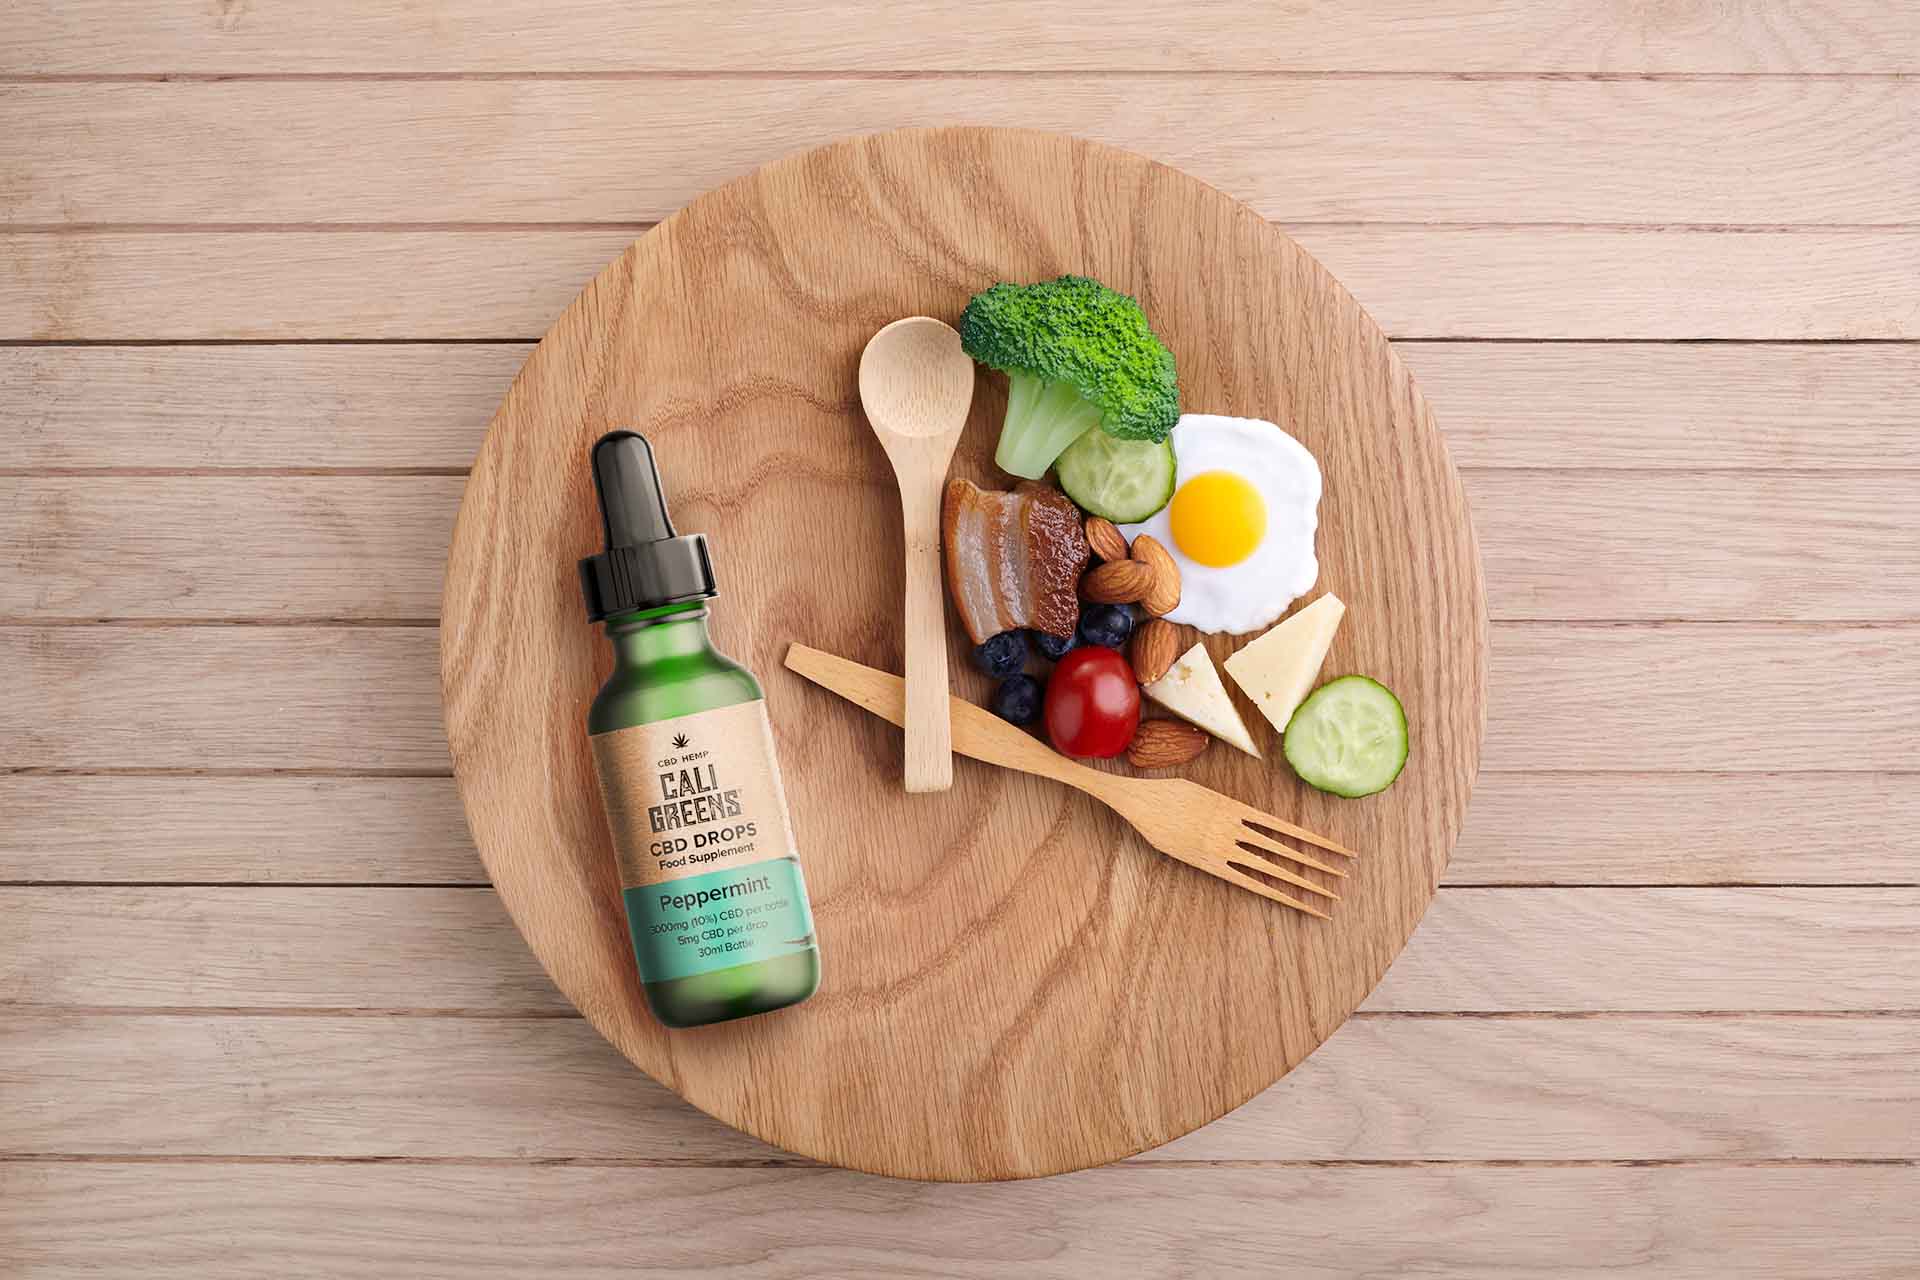 Wooden plate with food and Cali Greens CBD drops with spoons like clock hands (image)